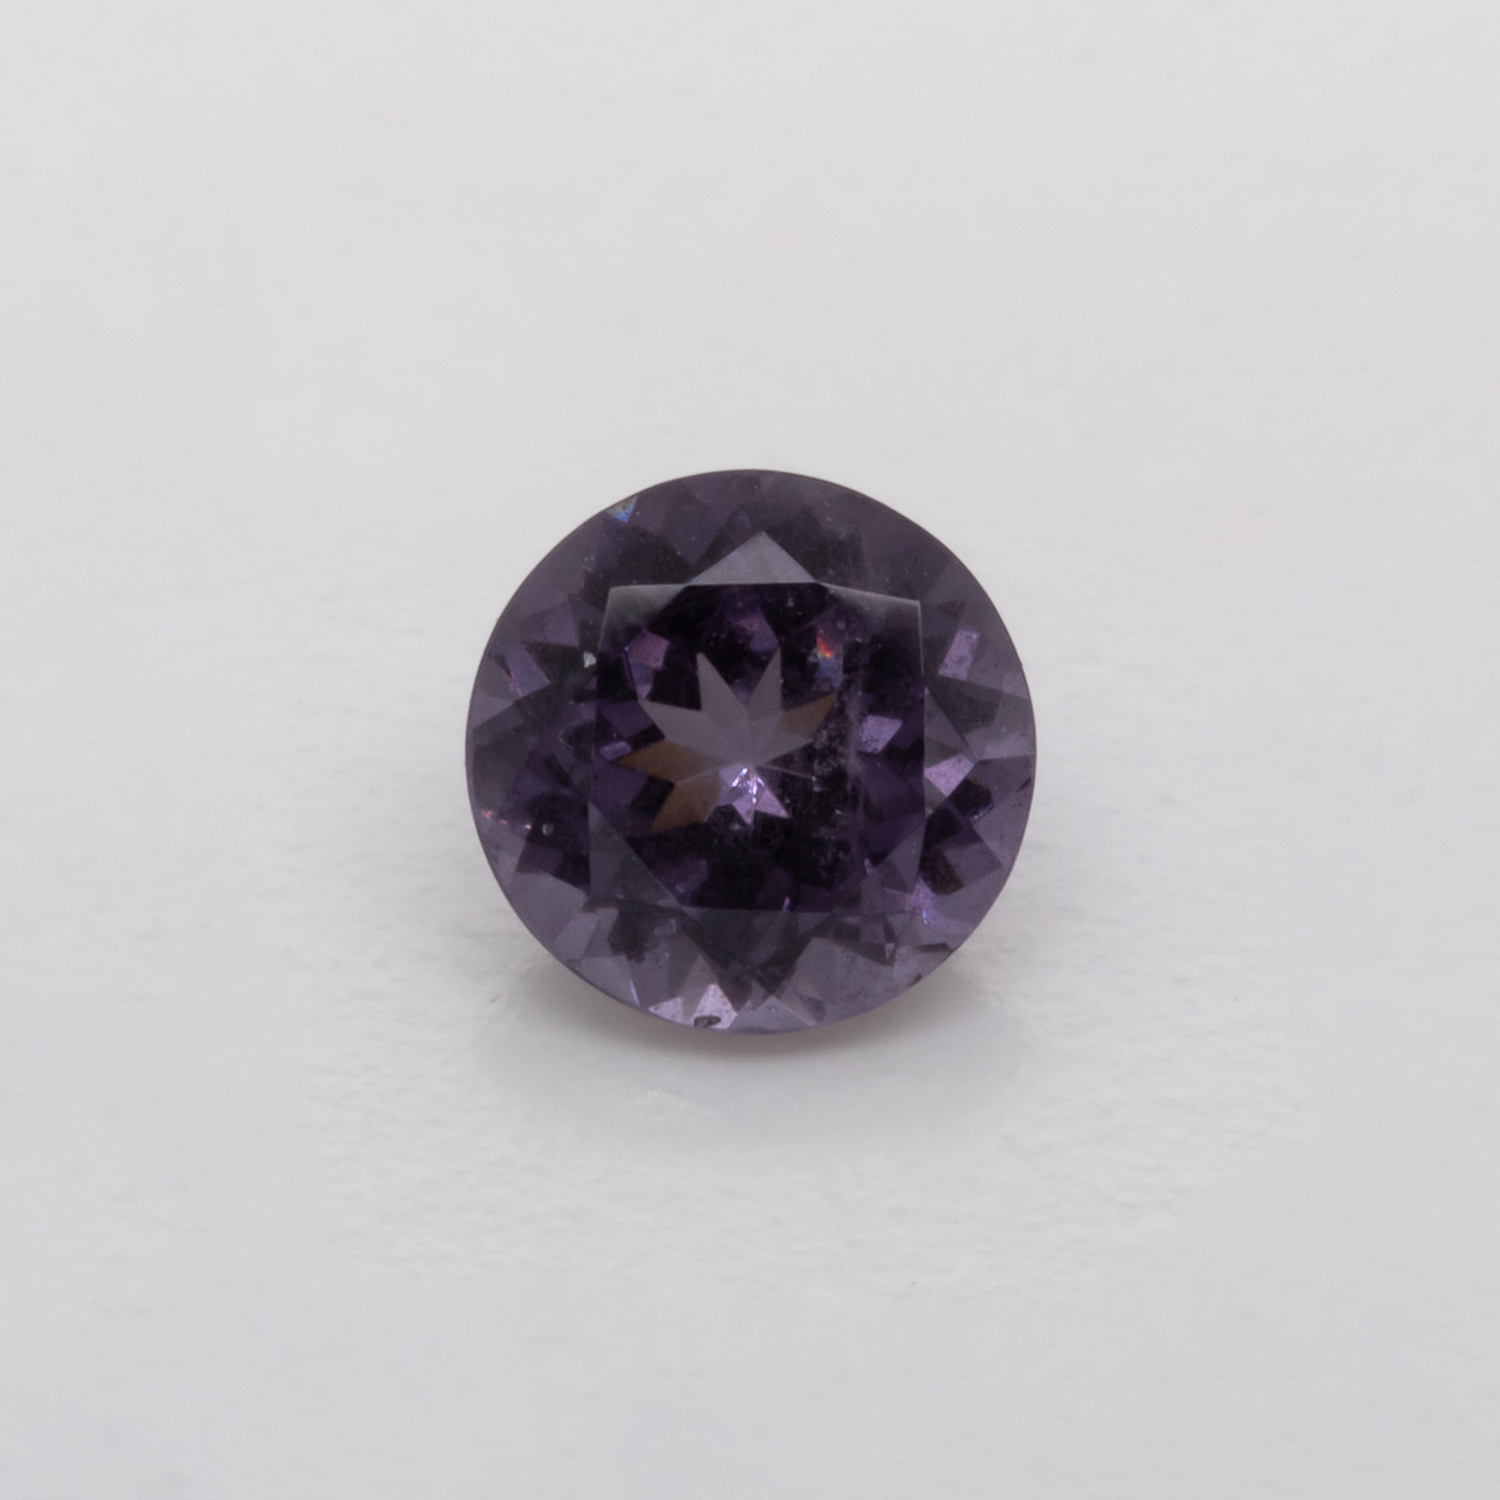 Spinell - lila, rund, 5,1x5,1 mm, 0,55 cts, Nr. SP90015